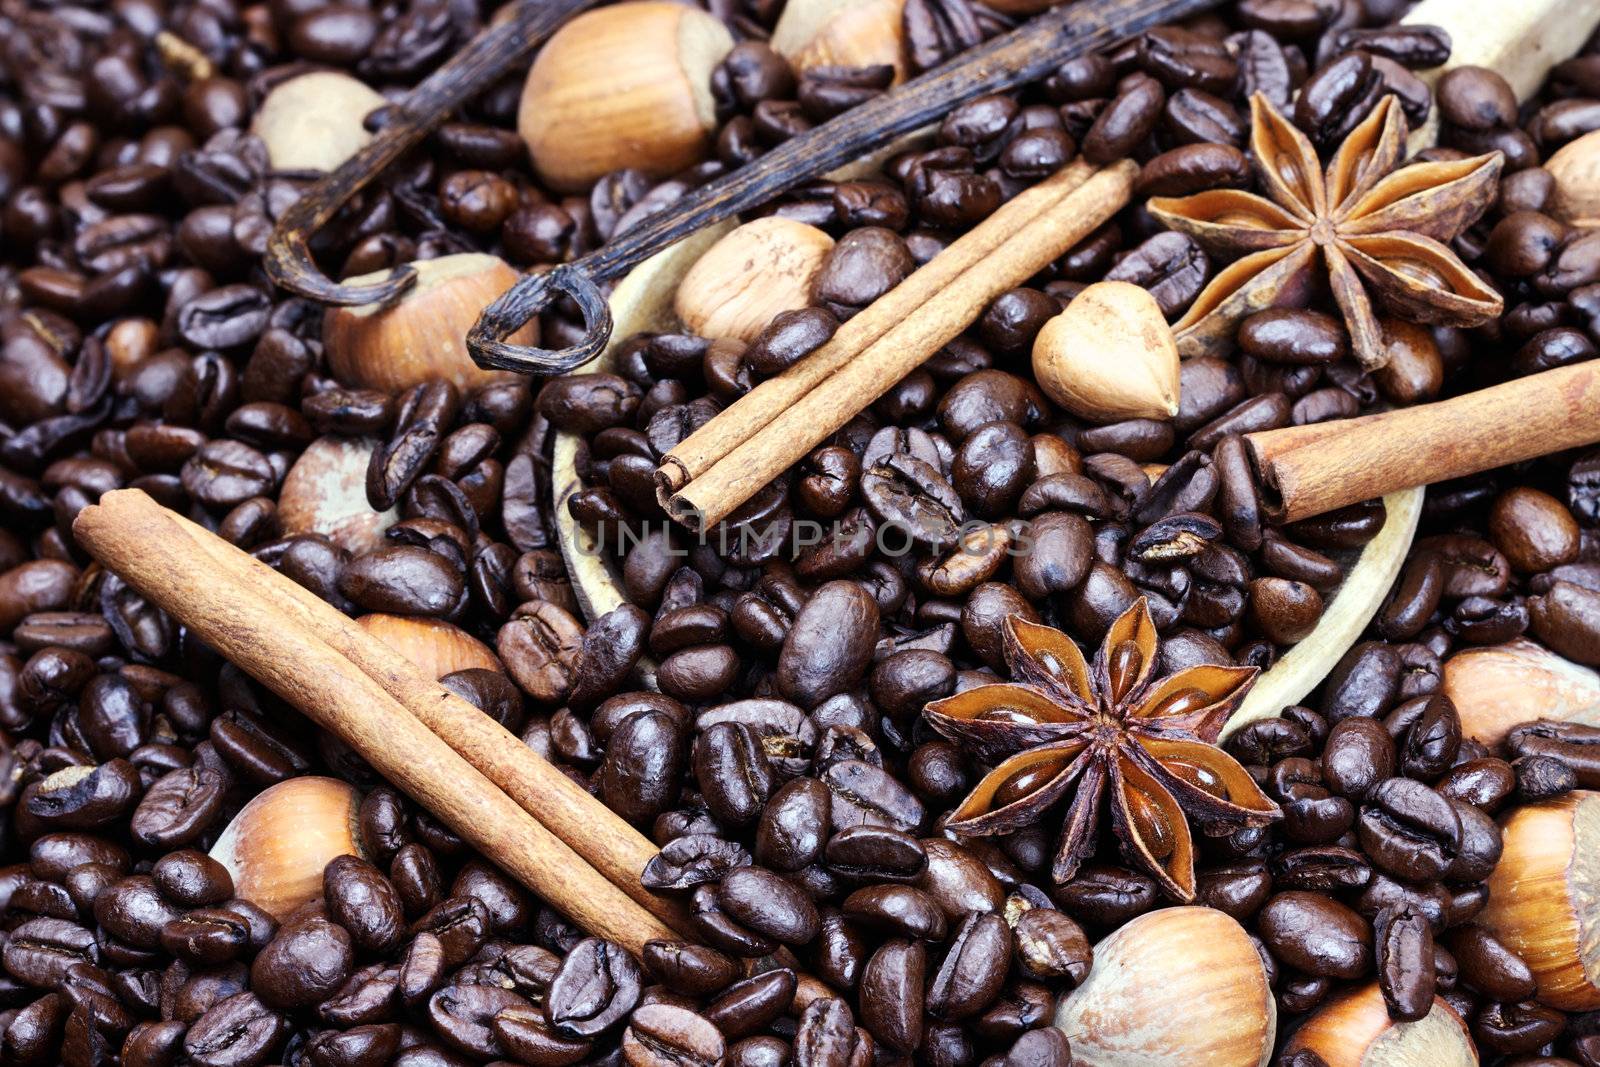 Background of gourmet coffee ingredients: coffee beans, ground coffee, hazelnuts, vanilla and cinnamon bark in a wooden spoon.